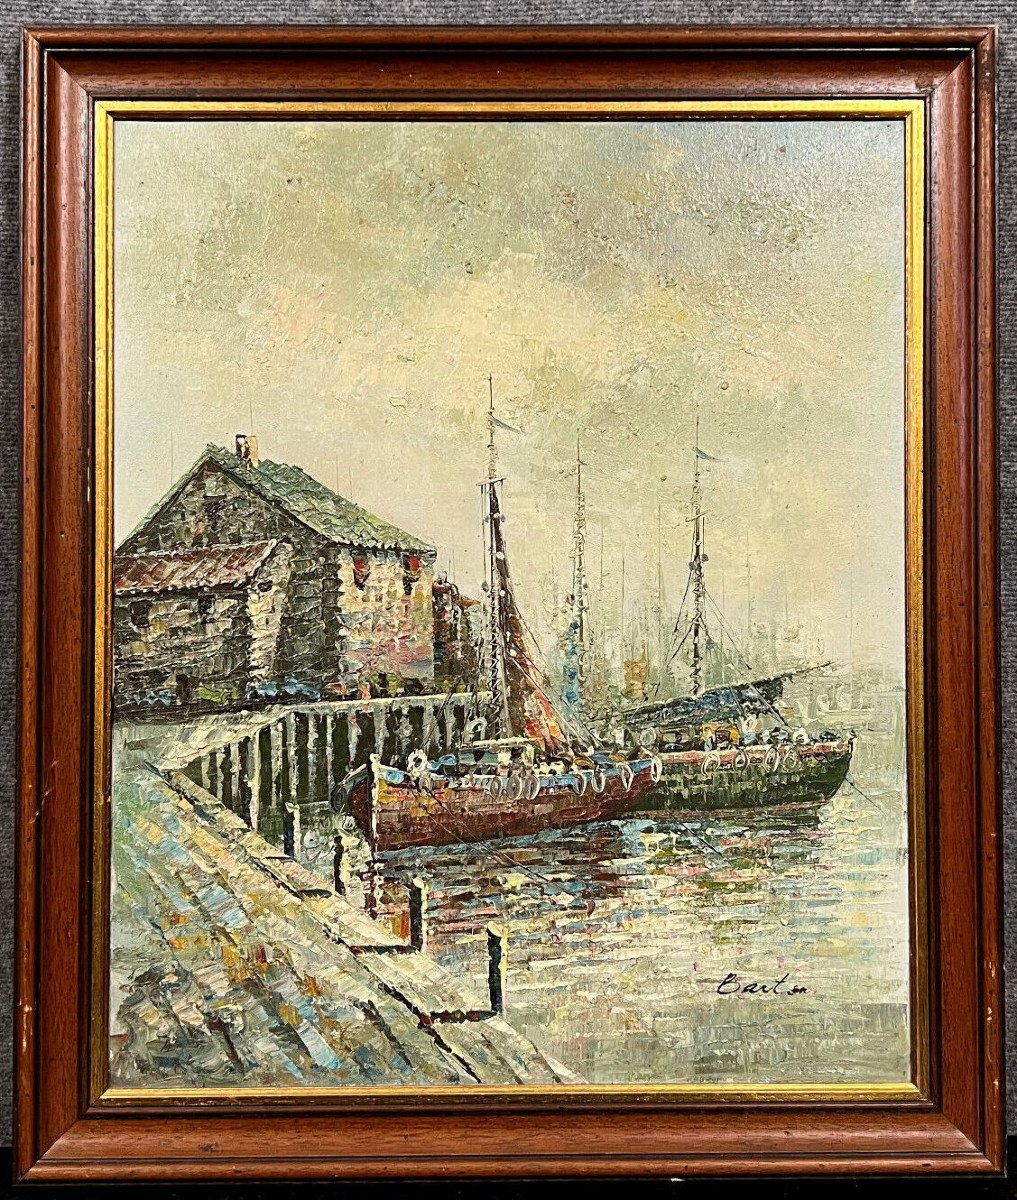   Large Oil Painting On Canvas Framed And Signed Second Half 20th Century